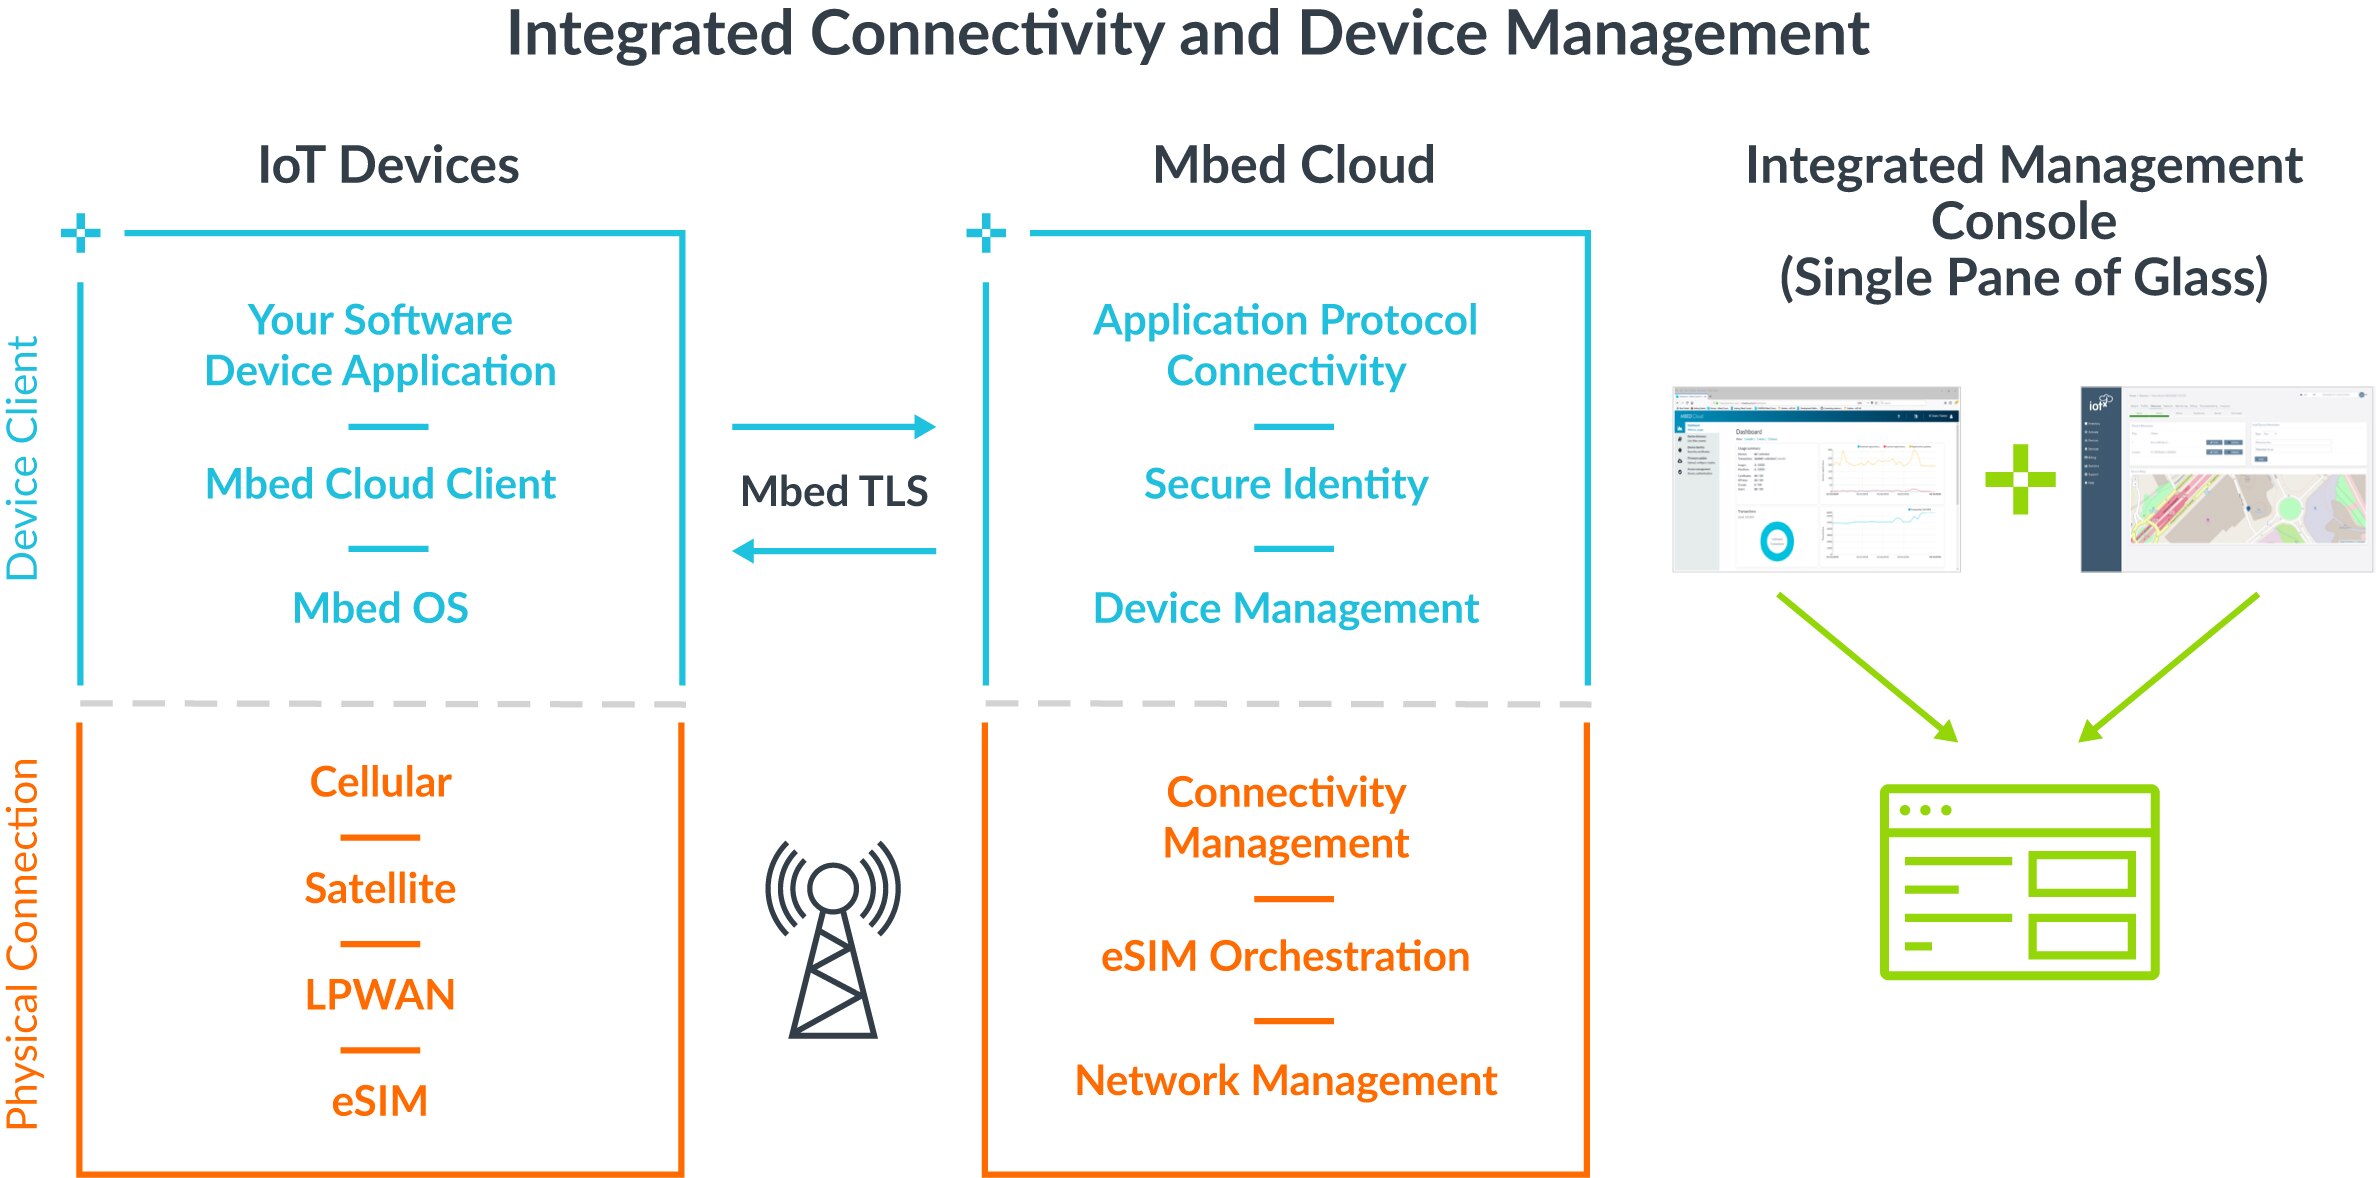 Arm Integrated Connectivity and Device Management